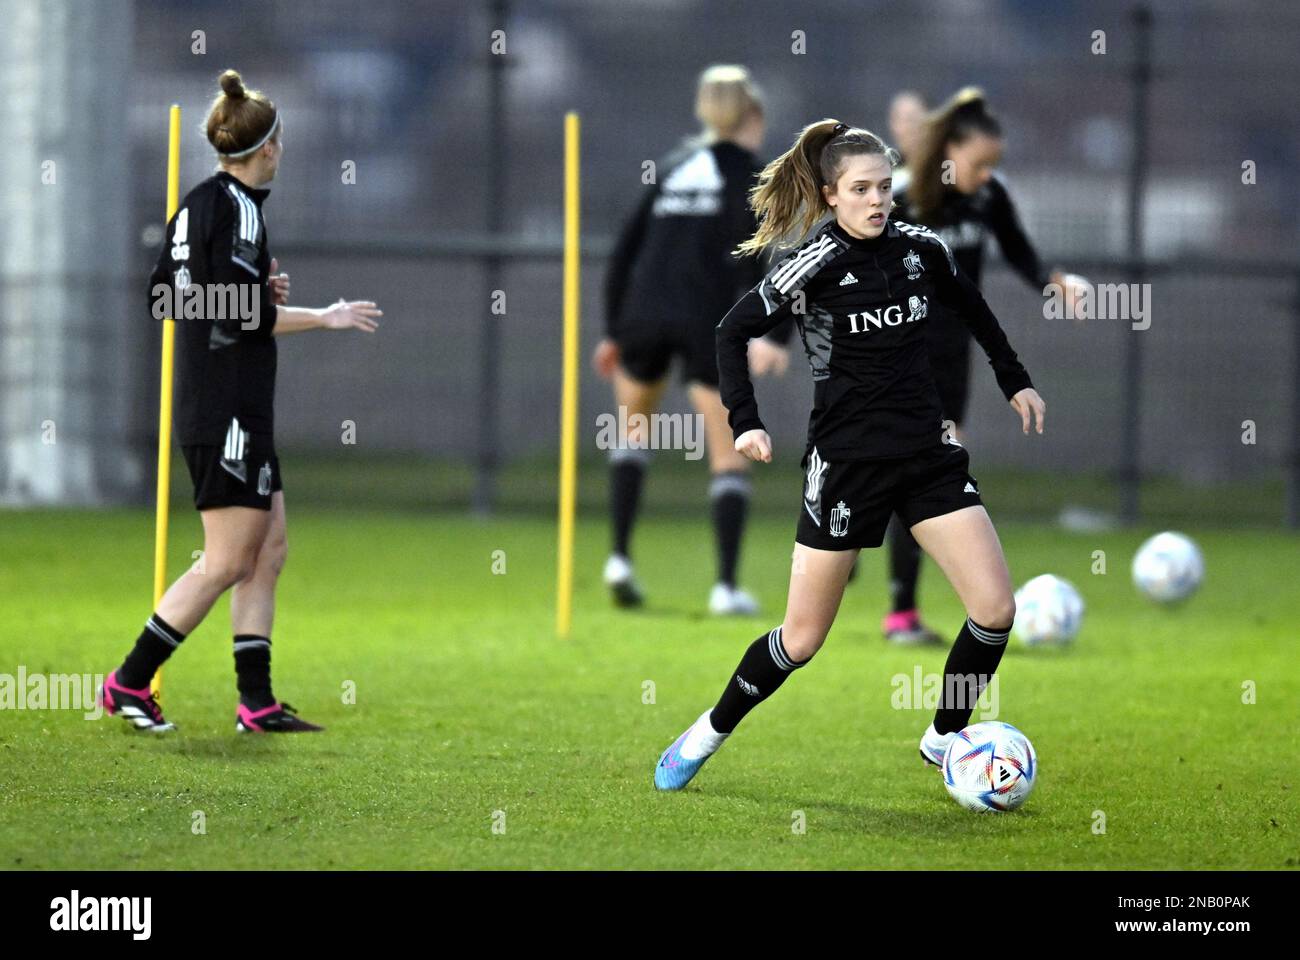 Valesca Ampoorter pictured during a training session of Belgium's national women's soccer team the Red Flames, in Tubize, Monday 13 February 2023. The Red Flames are participating in the Arnold Clark Cup, an invitational women's association football tournament, from 16 to 22 February 2023. BELGA PHOTO ERIC LALMAND Stock Photo